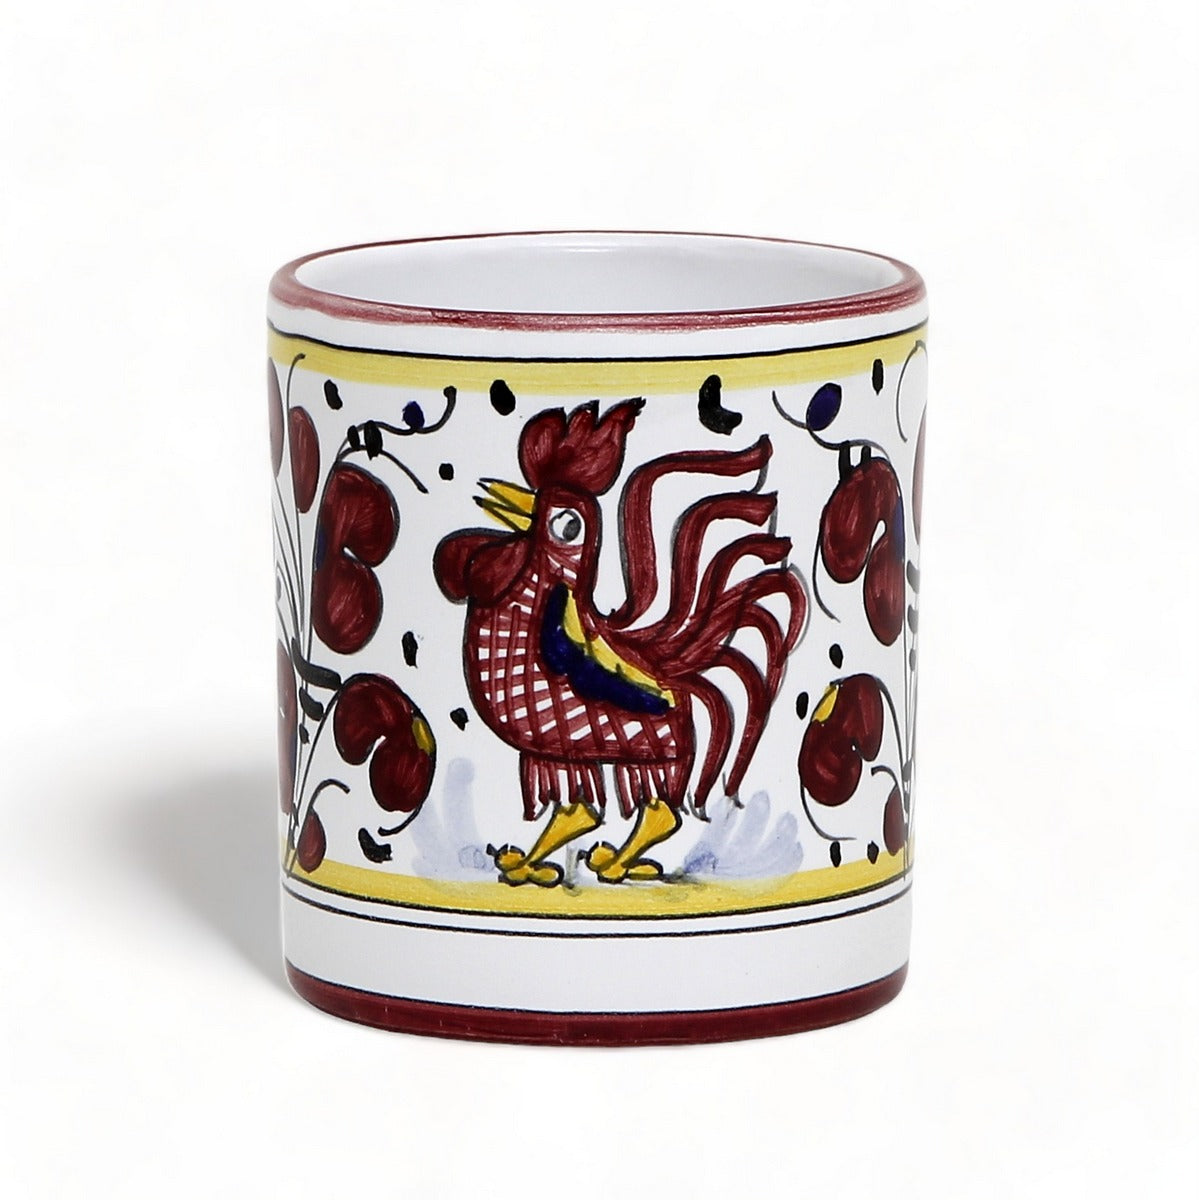 DERUTA RED ROOSTER MUGS SET: 4 Mugs as shown and wrought iron four arms mug stand tree black.